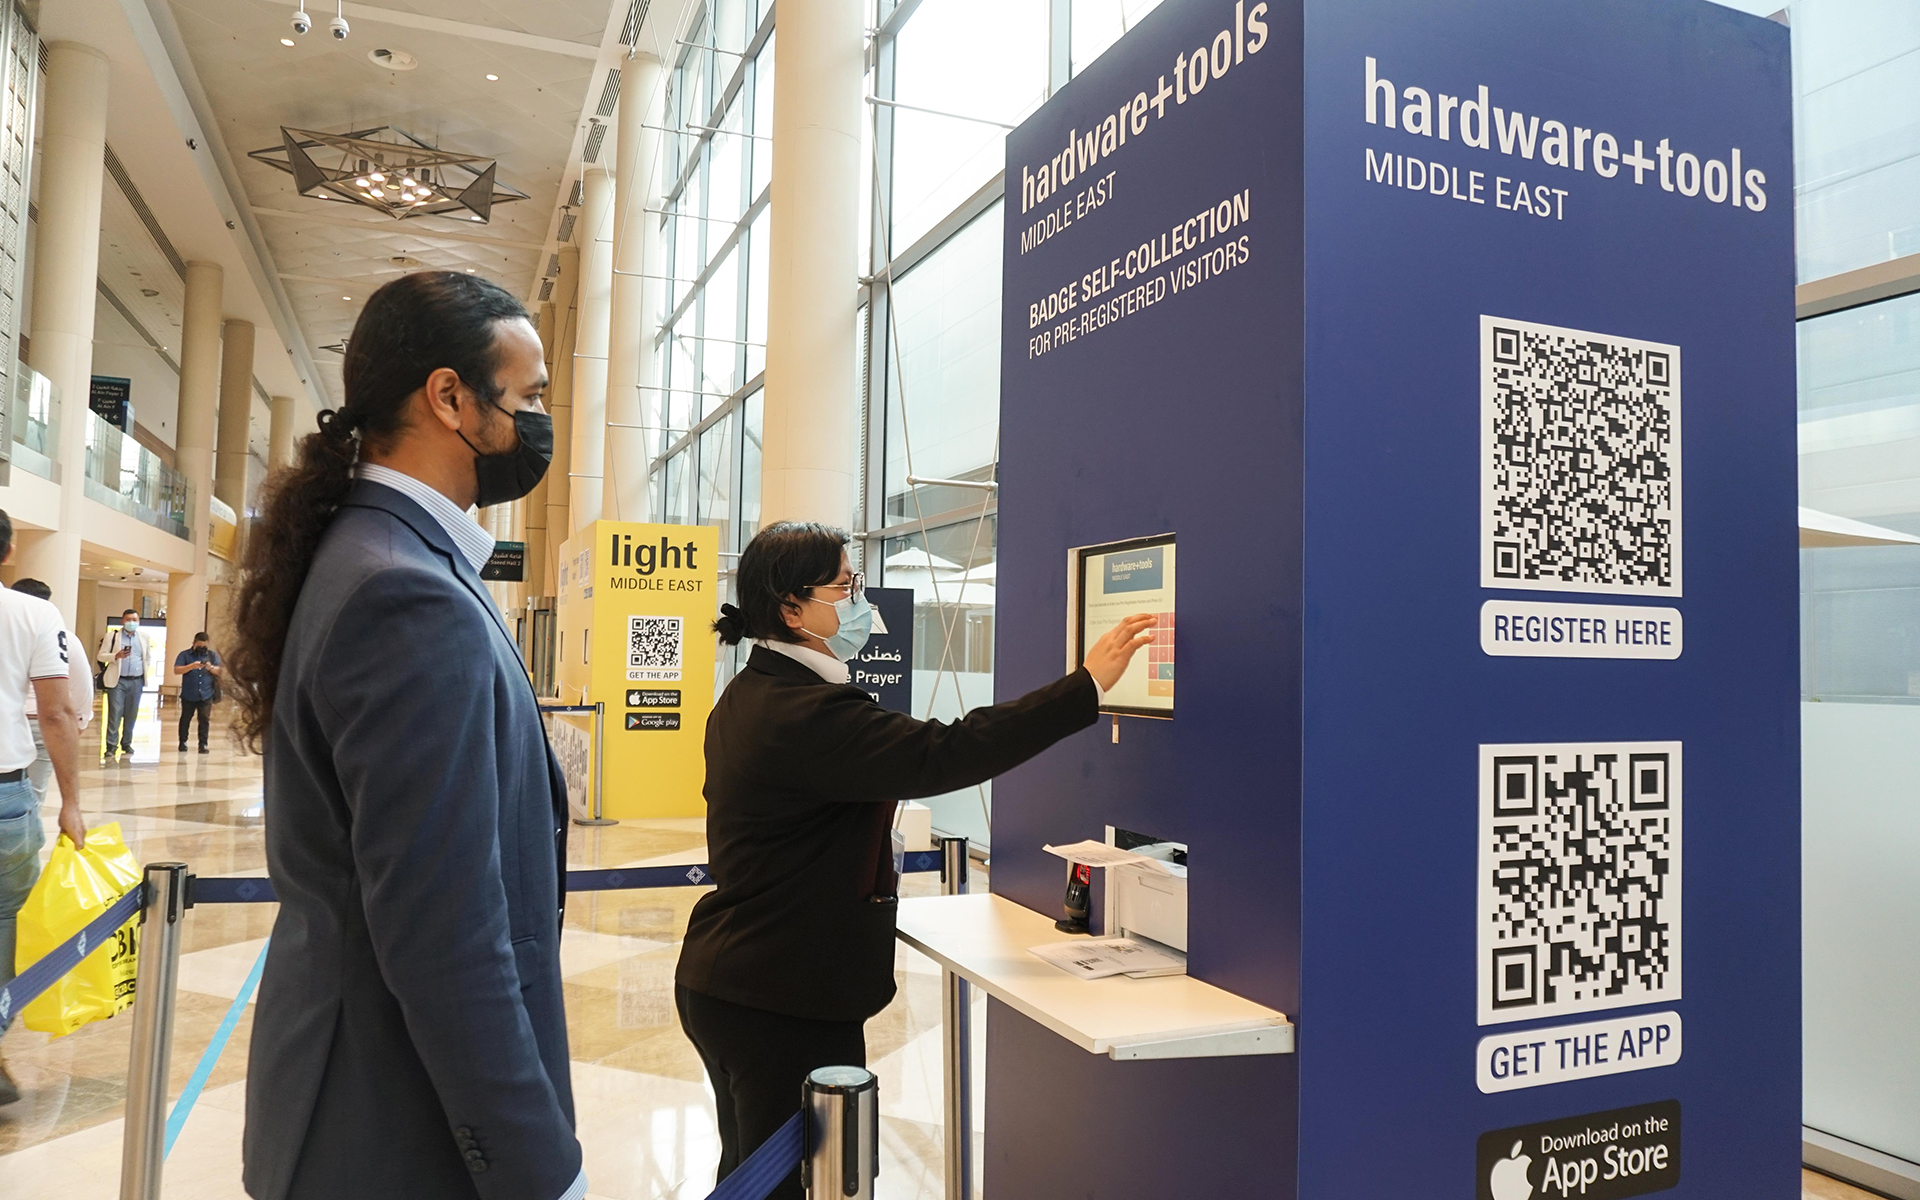 Hardware + Tools Middle East 2021